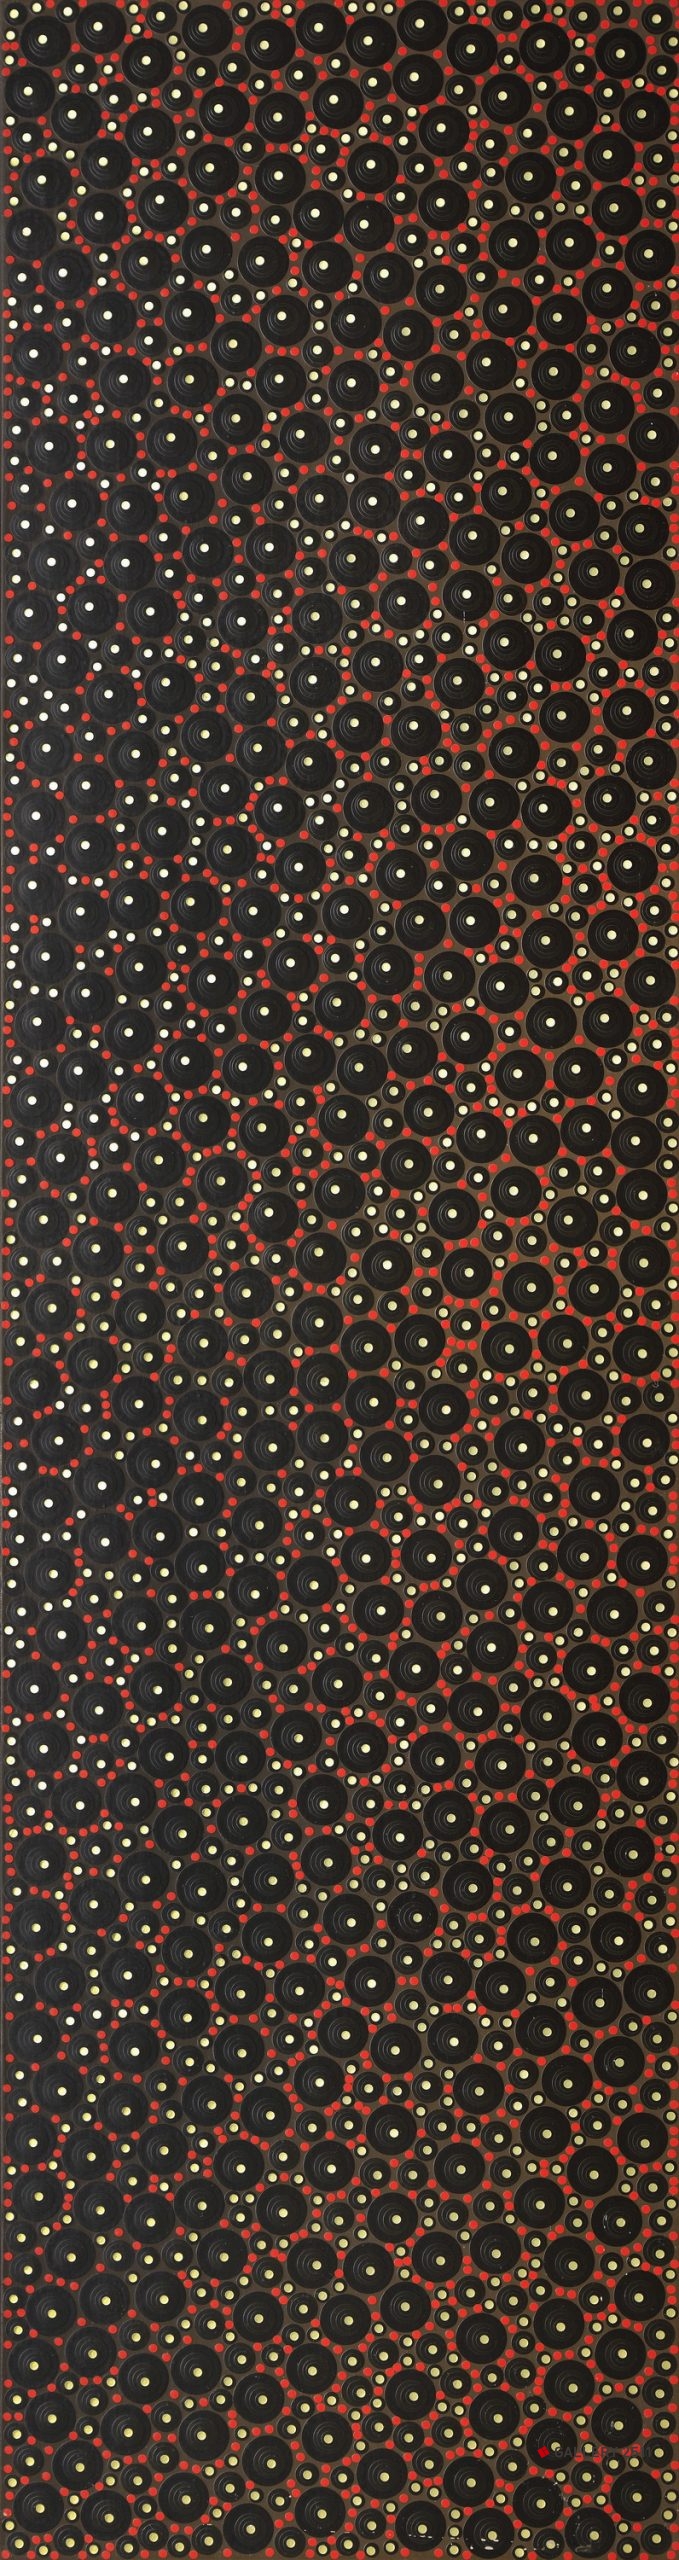 No.083 -「black and small red.gold on dark brown」
 キャンバス、シール, 
 W405mm × H1500mm, 
 1995